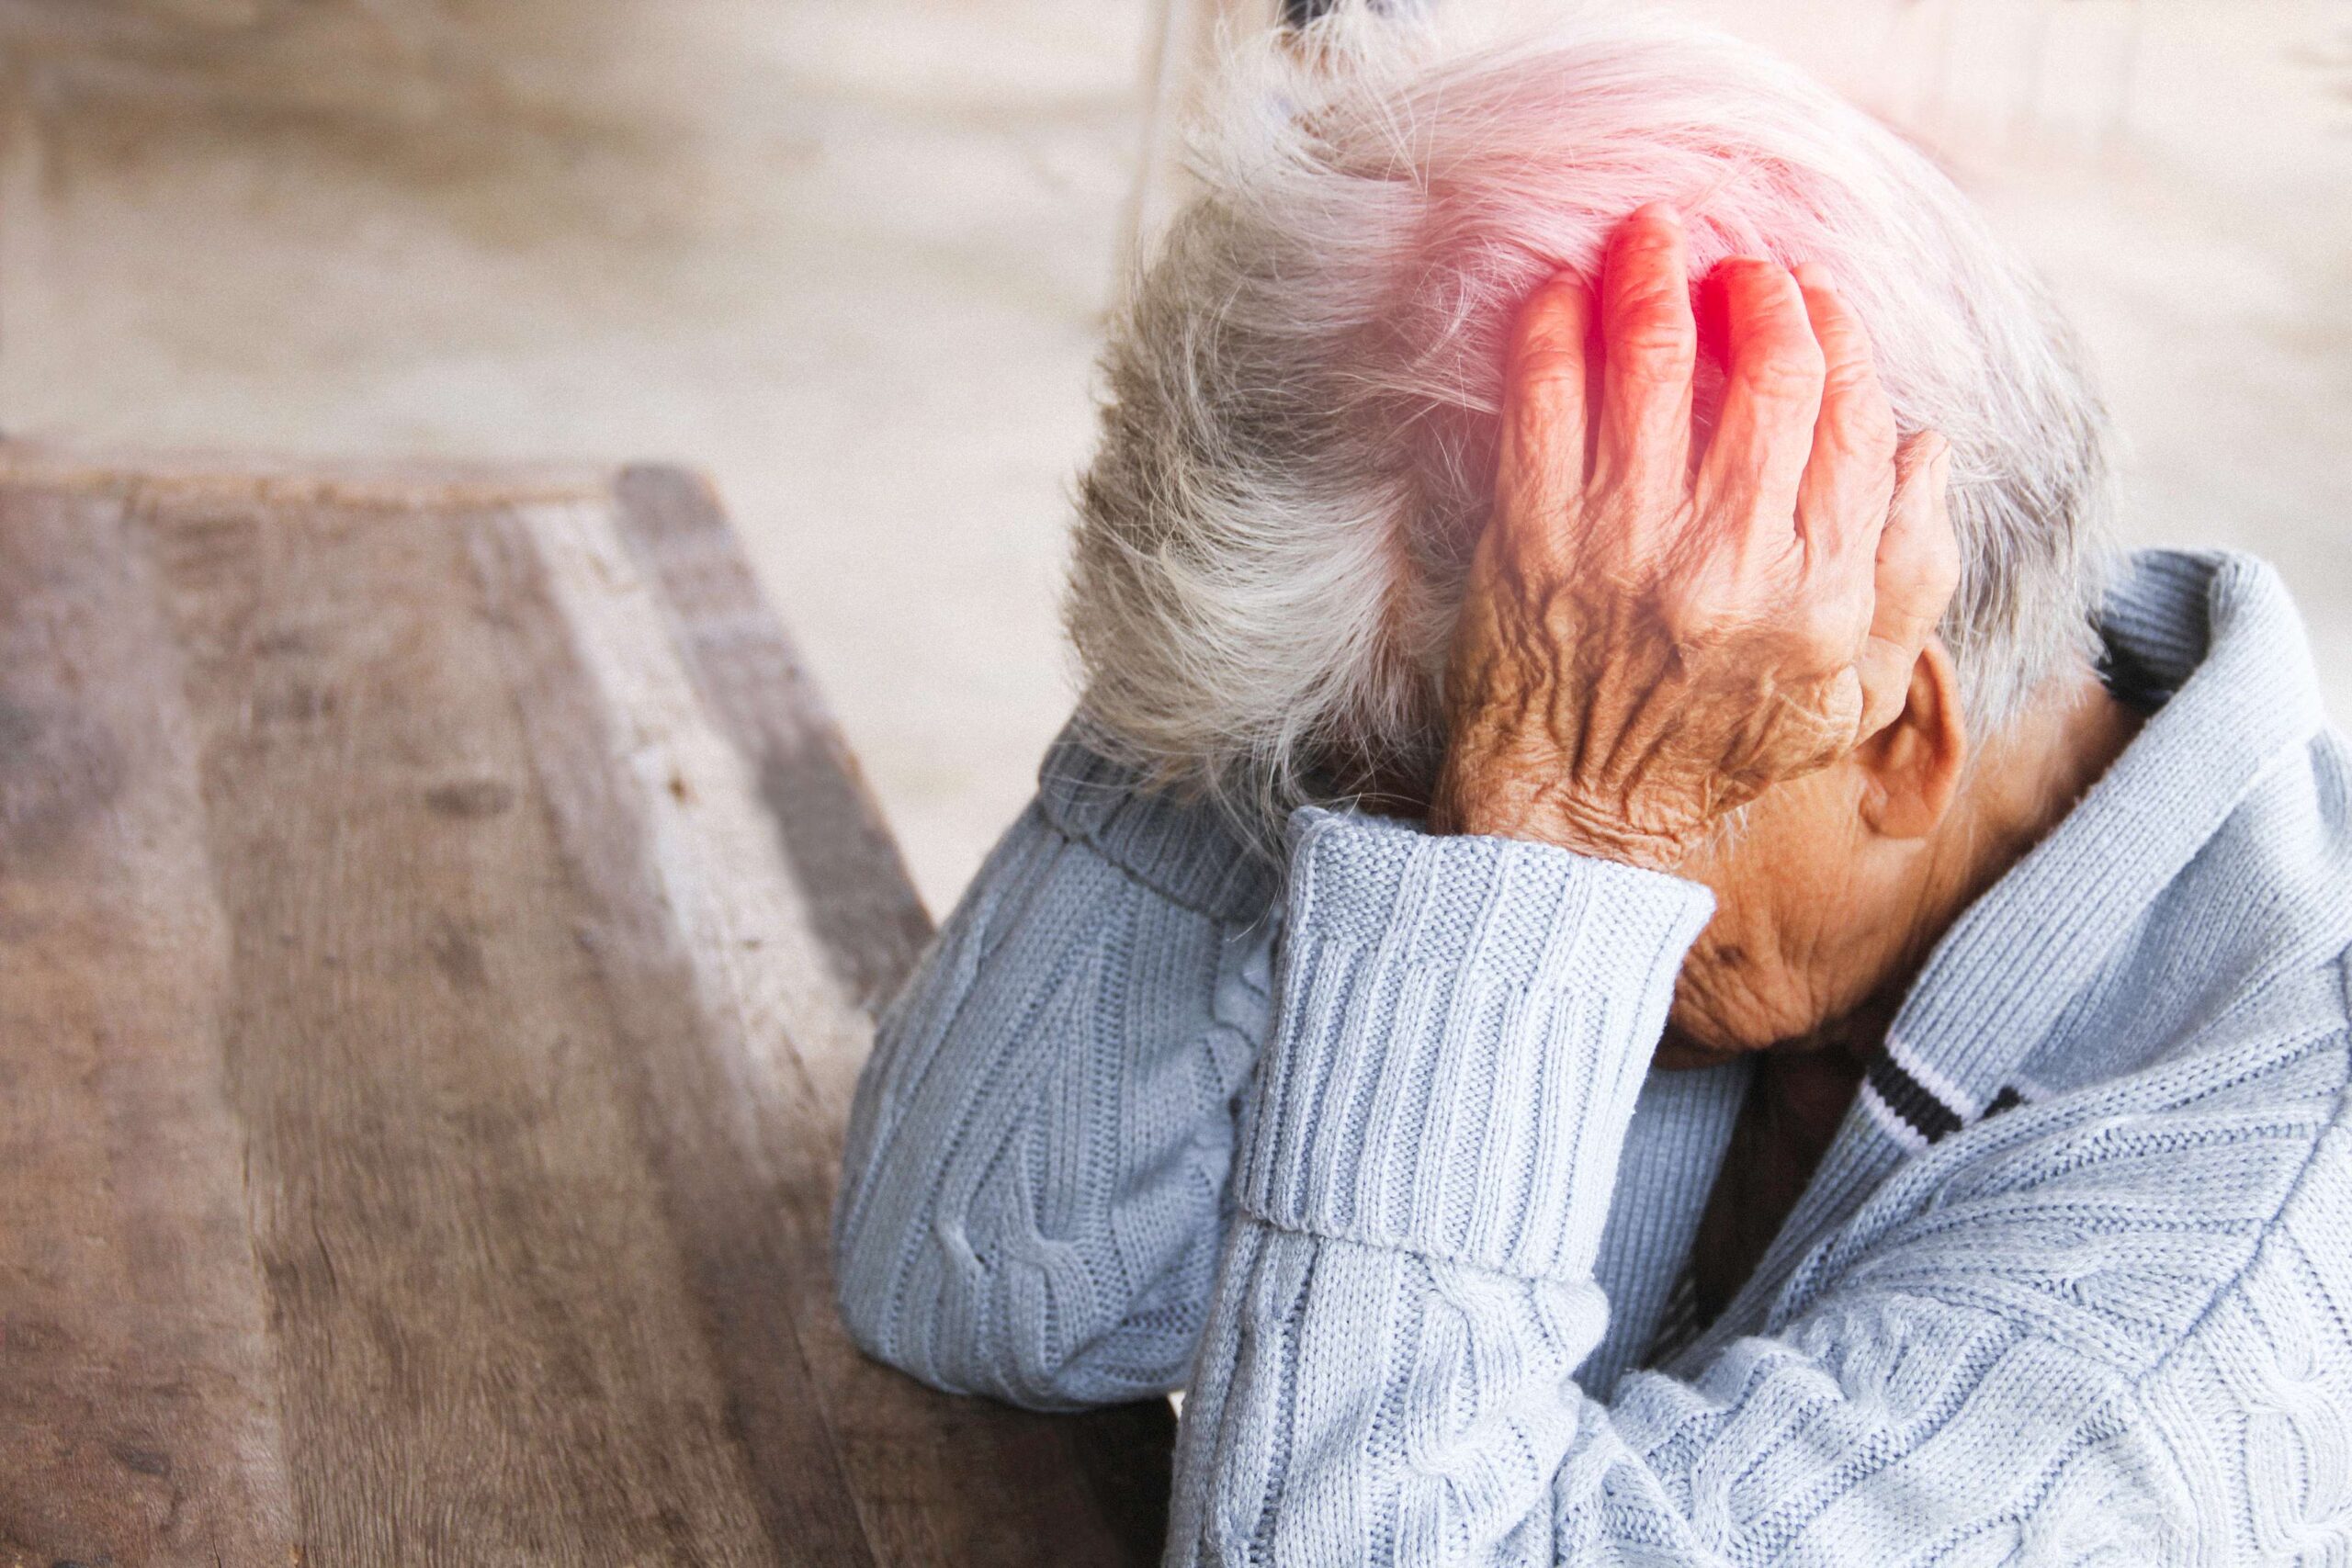 What are the warning signs of elder abuse and neglect?